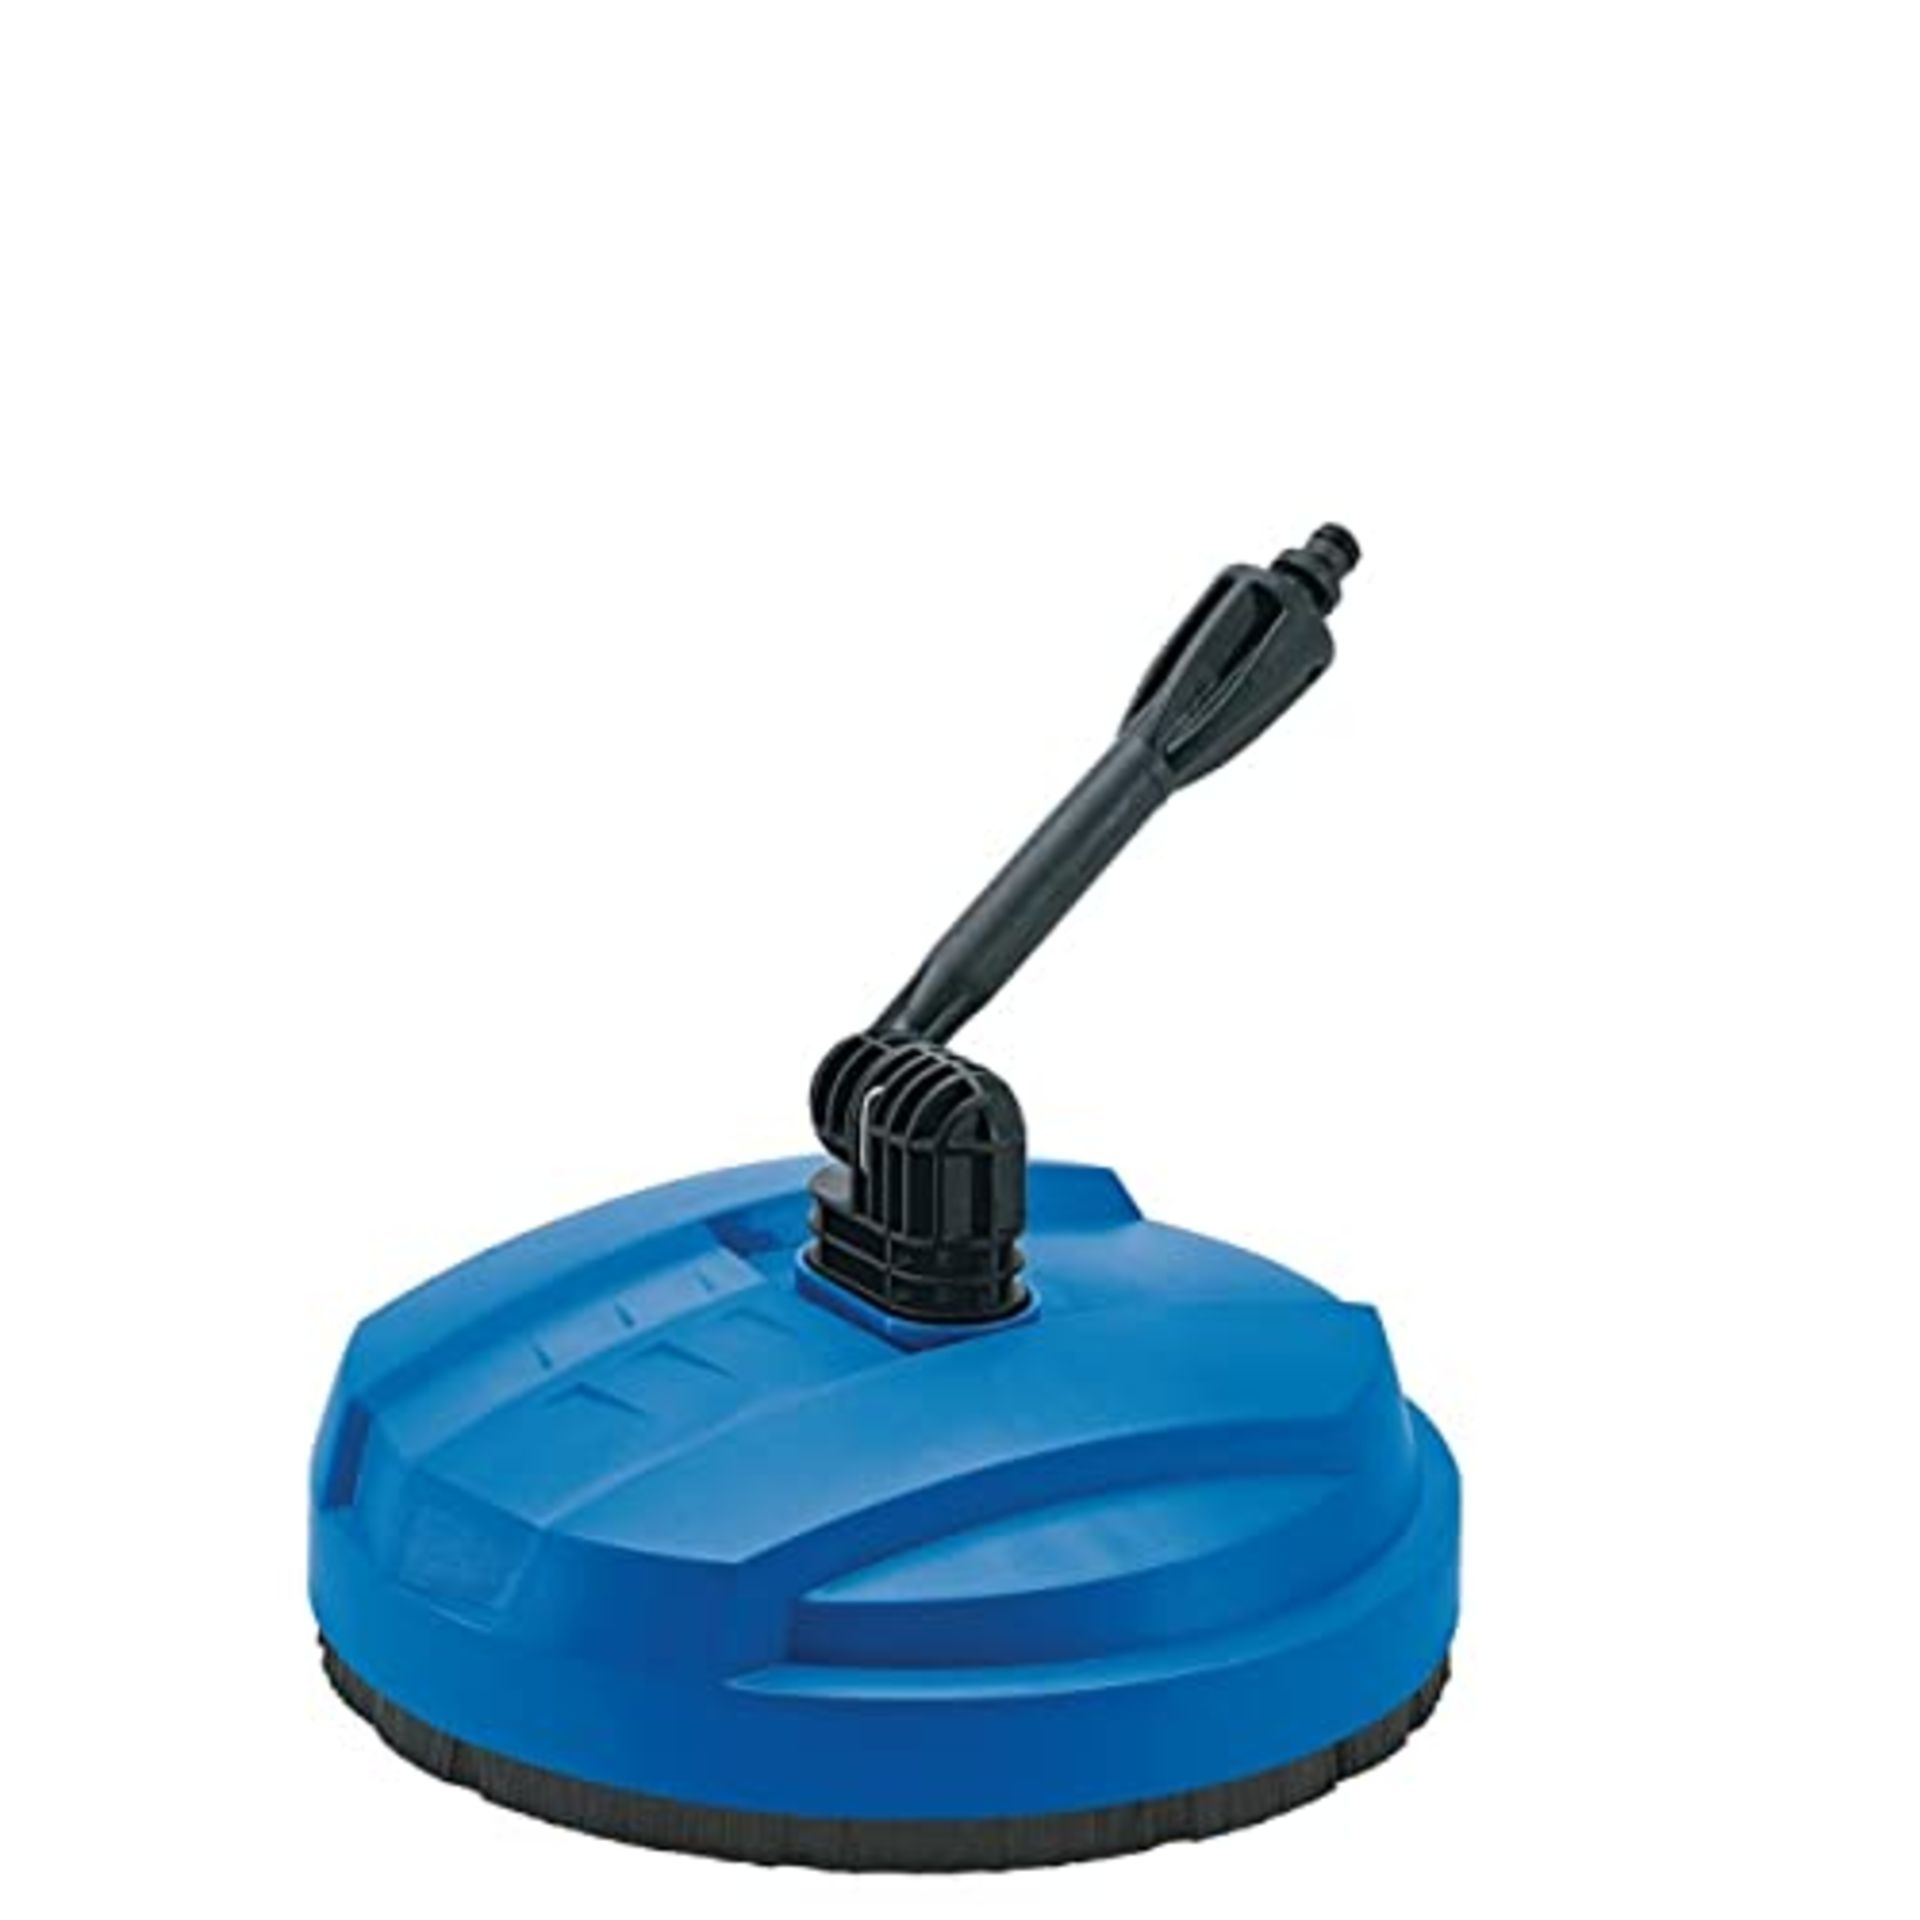 Draper 02013 Pressure Washer Compact Rotary Patio Cleaner, Blue